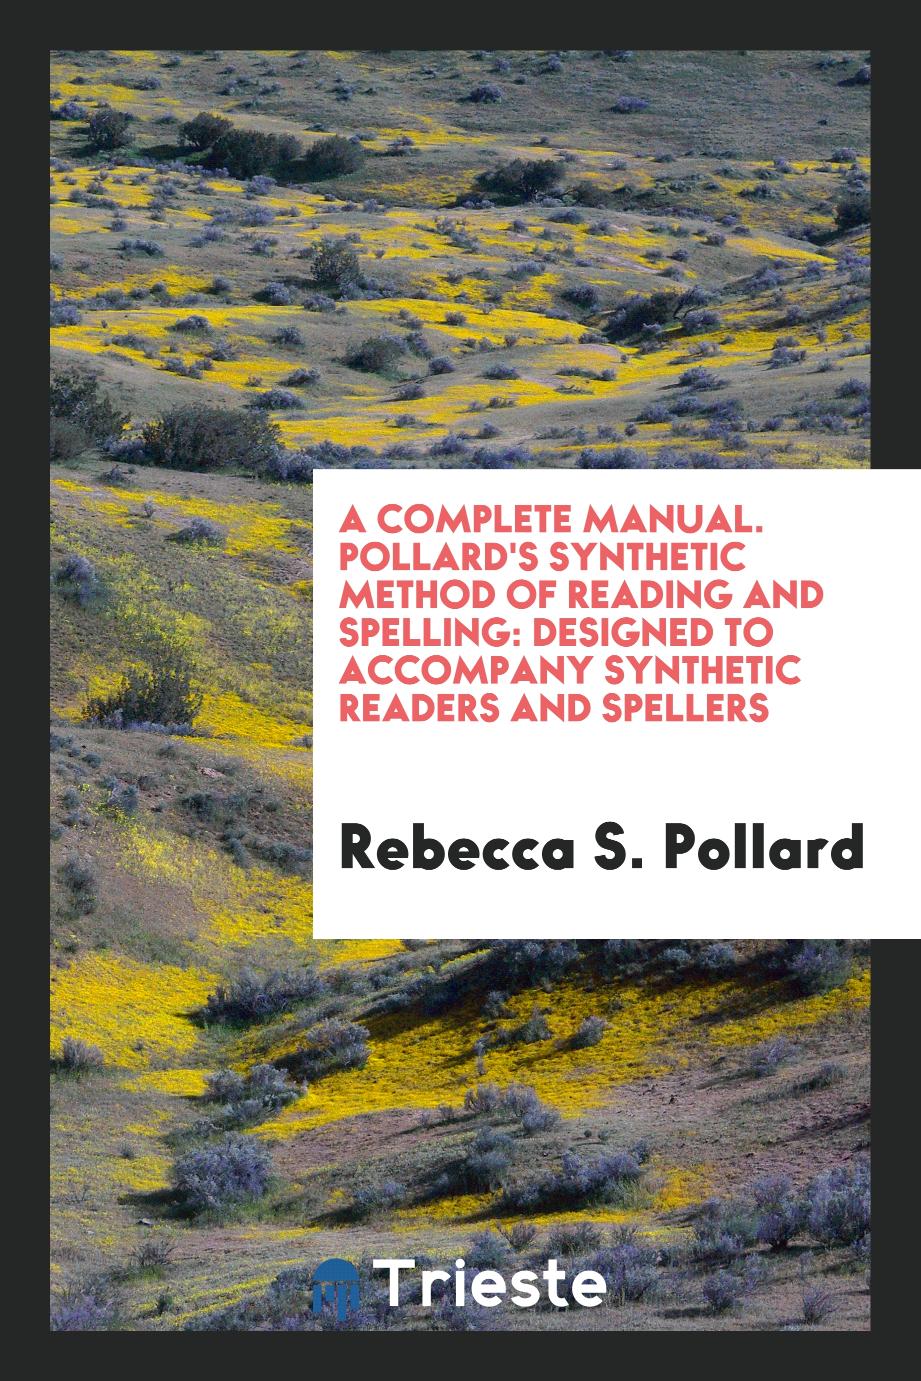 A Complete Manual. Pollard's Synthetic Method of Reading and Spelling: Designed to Accompany Synthetic Readers and Spellers